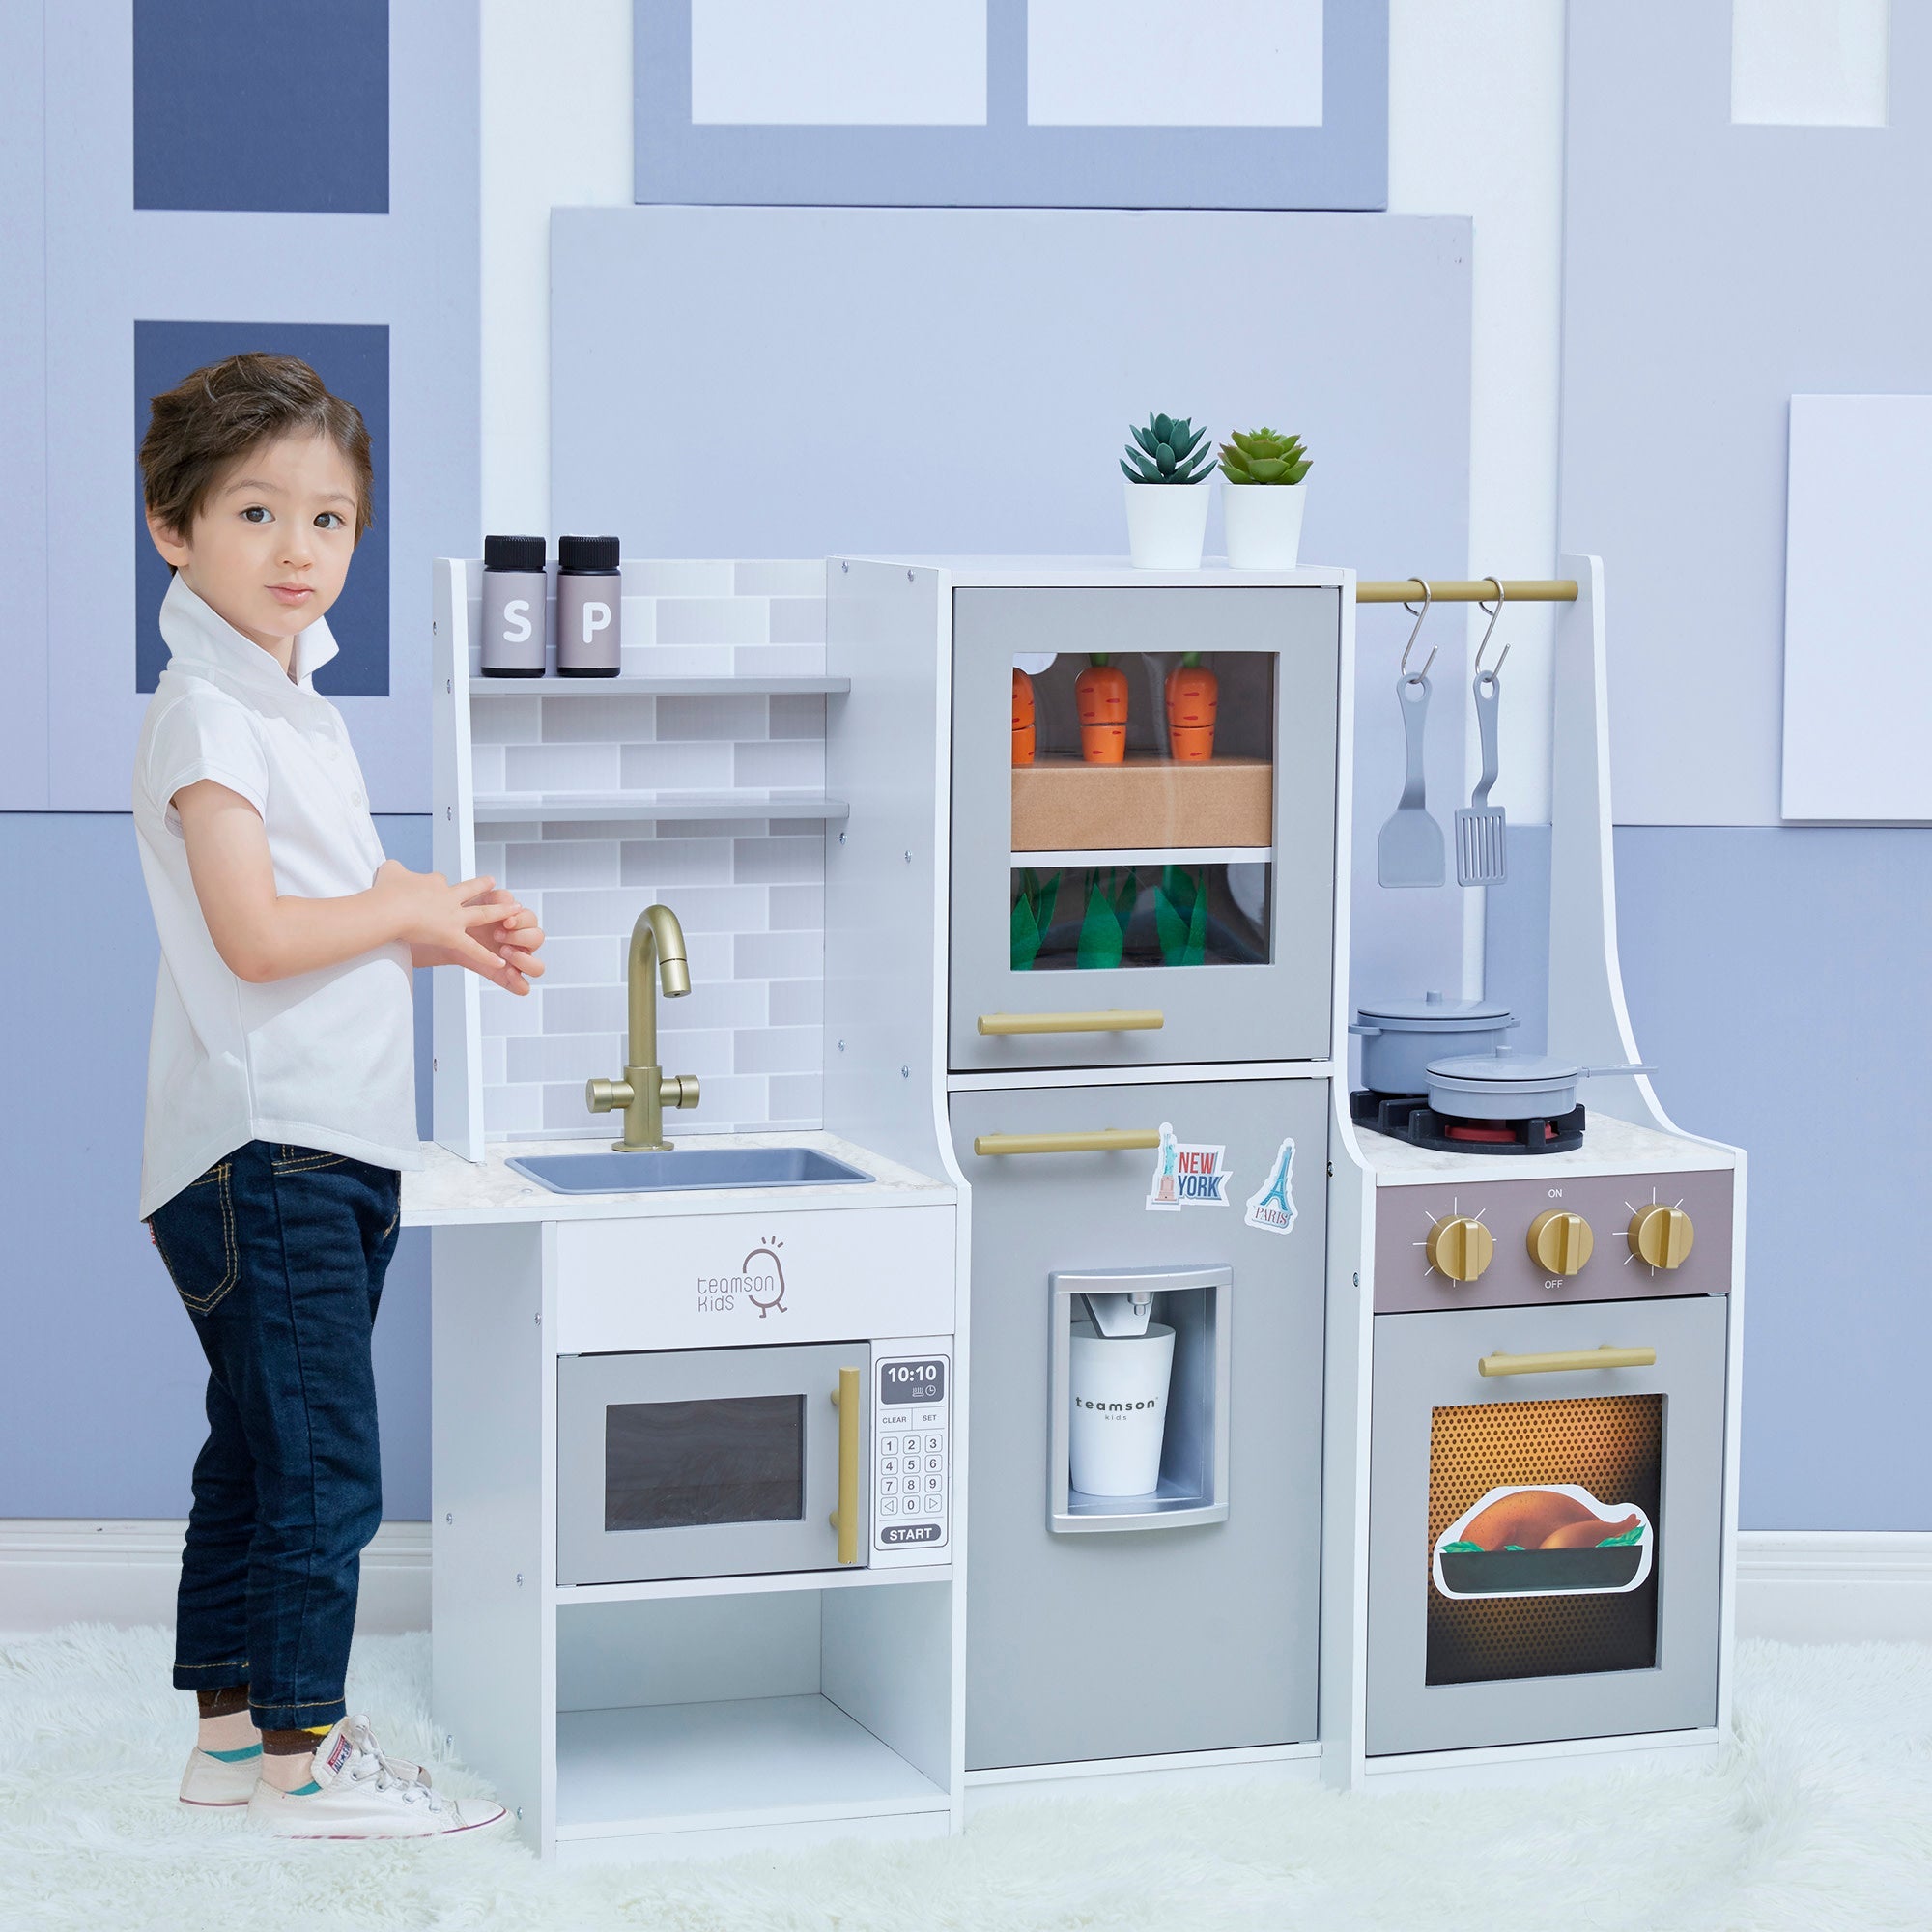 Little Chef Lyon Complete Wooden Kitchen Set with Hydroponic Garden, Refrigerator and Accessories, Gray